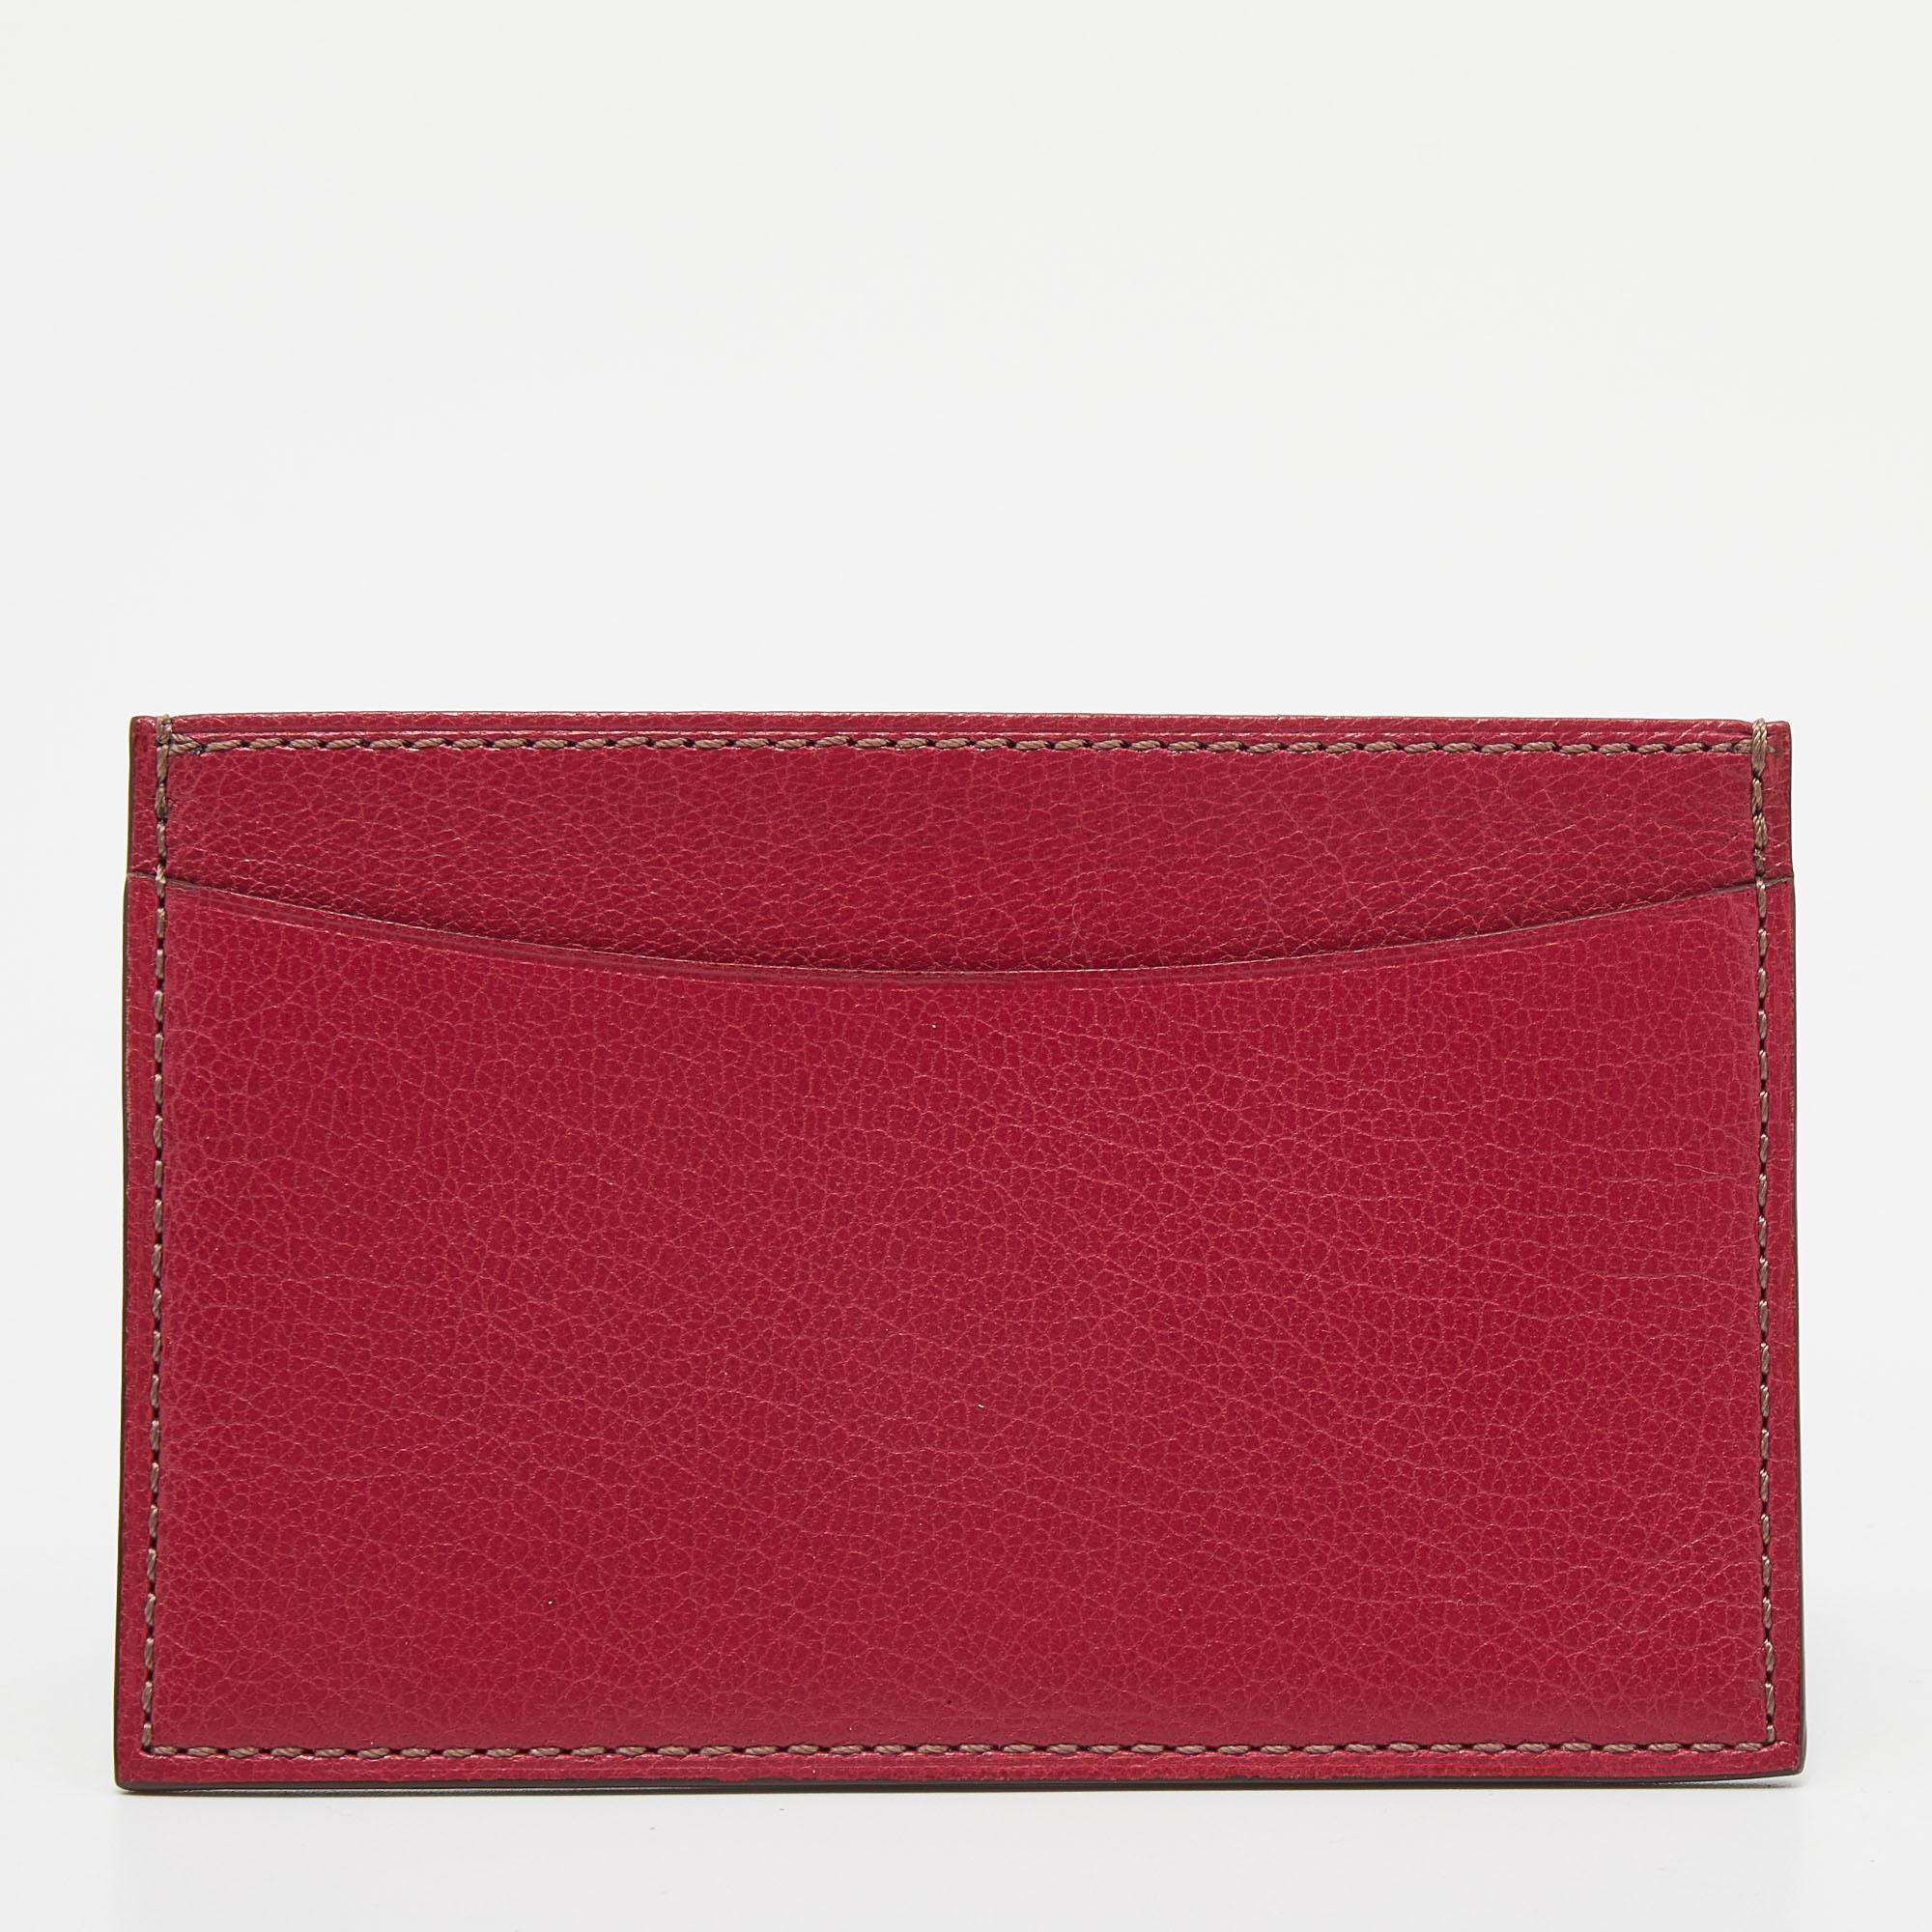 With a compact silhouette, this Cartier card holder is a reliable accessory. Crafted from pink leather, it displays brand detailing on the front, and its Alcantara-lined interior will keep your cards organized.

